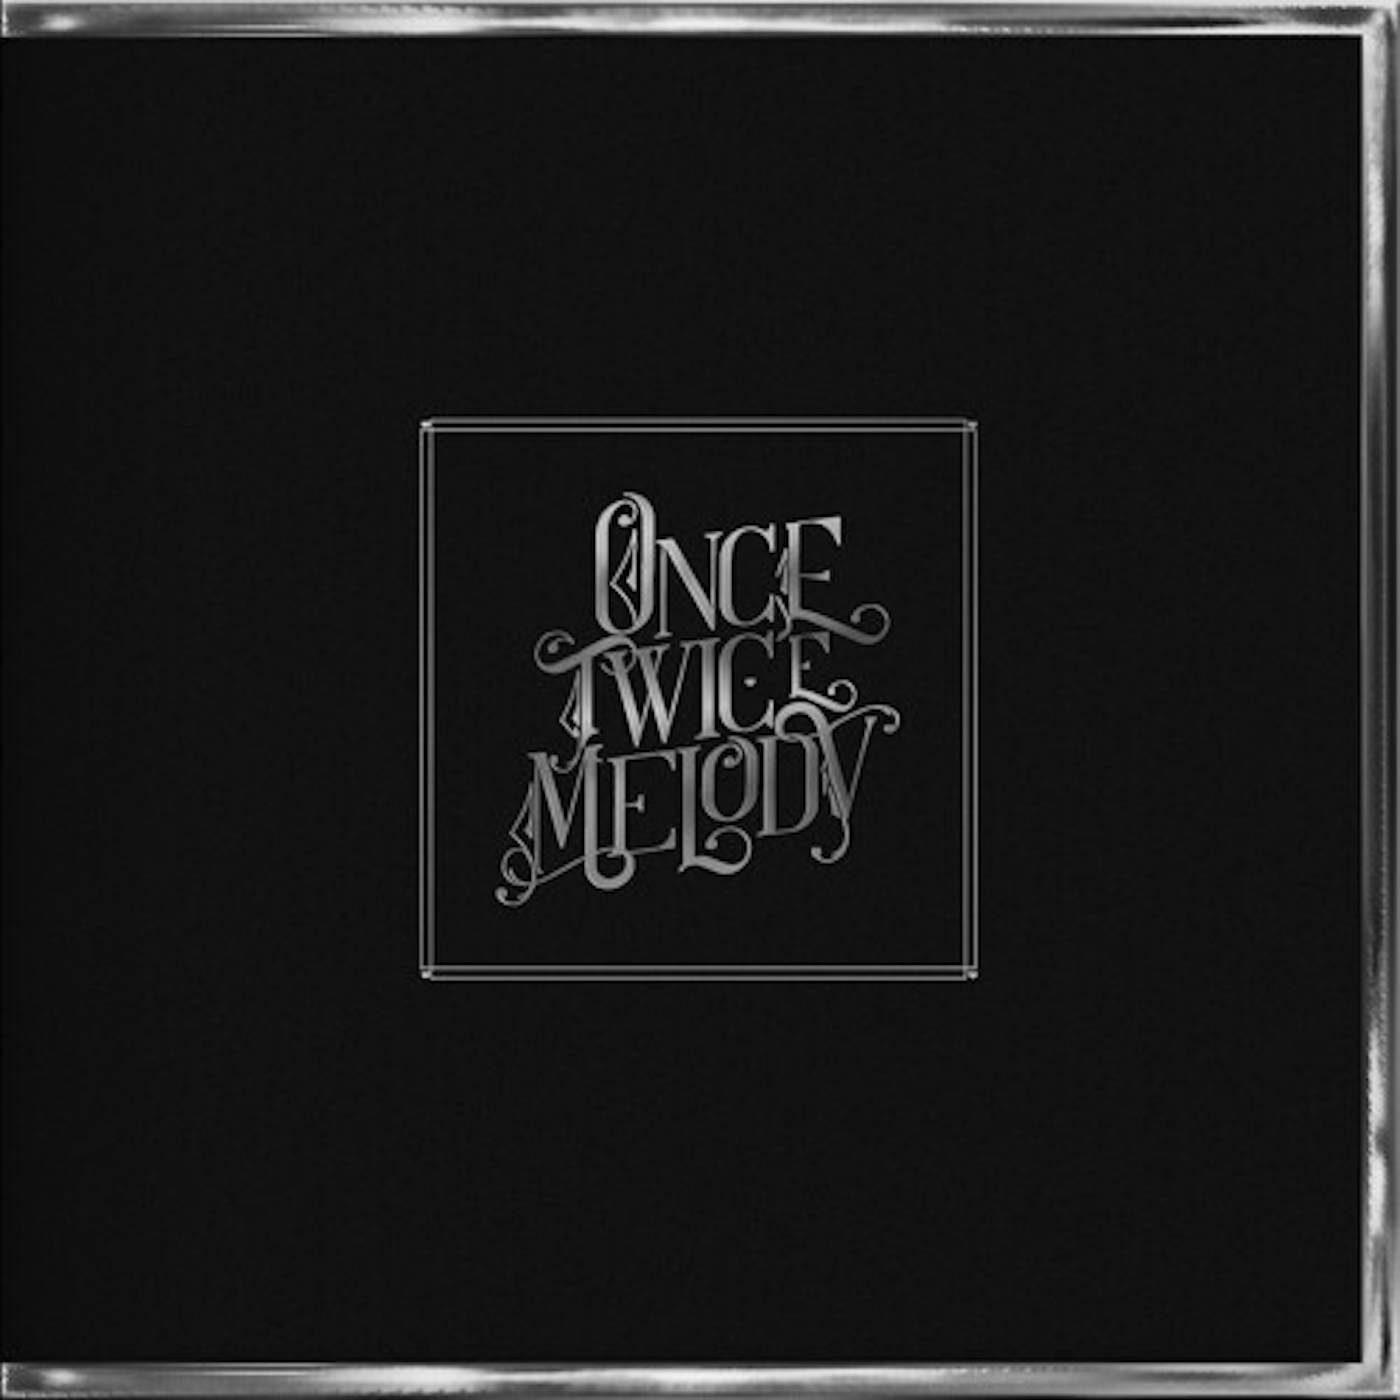 Beach House ONCE TWICE MELODY (SILVER EDITION) Vinyl Record